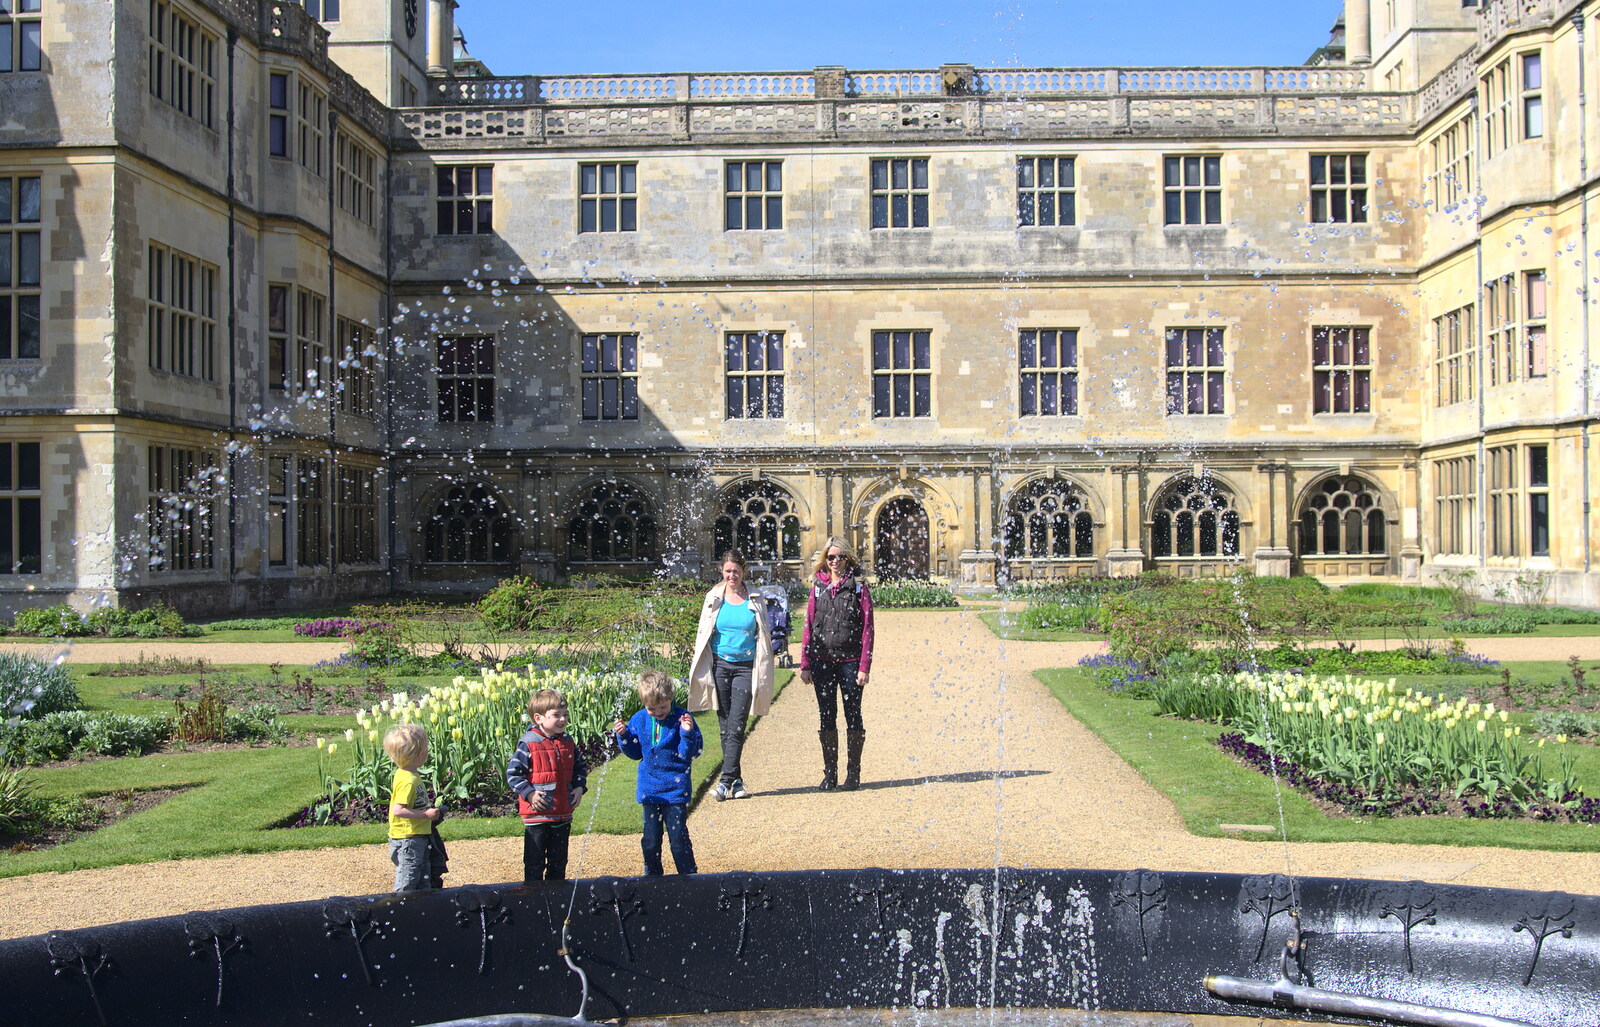 Harry, Kane and Fred get wet from A Trip to Audley End House, Saffron Walden, Essex - 16th April 2014